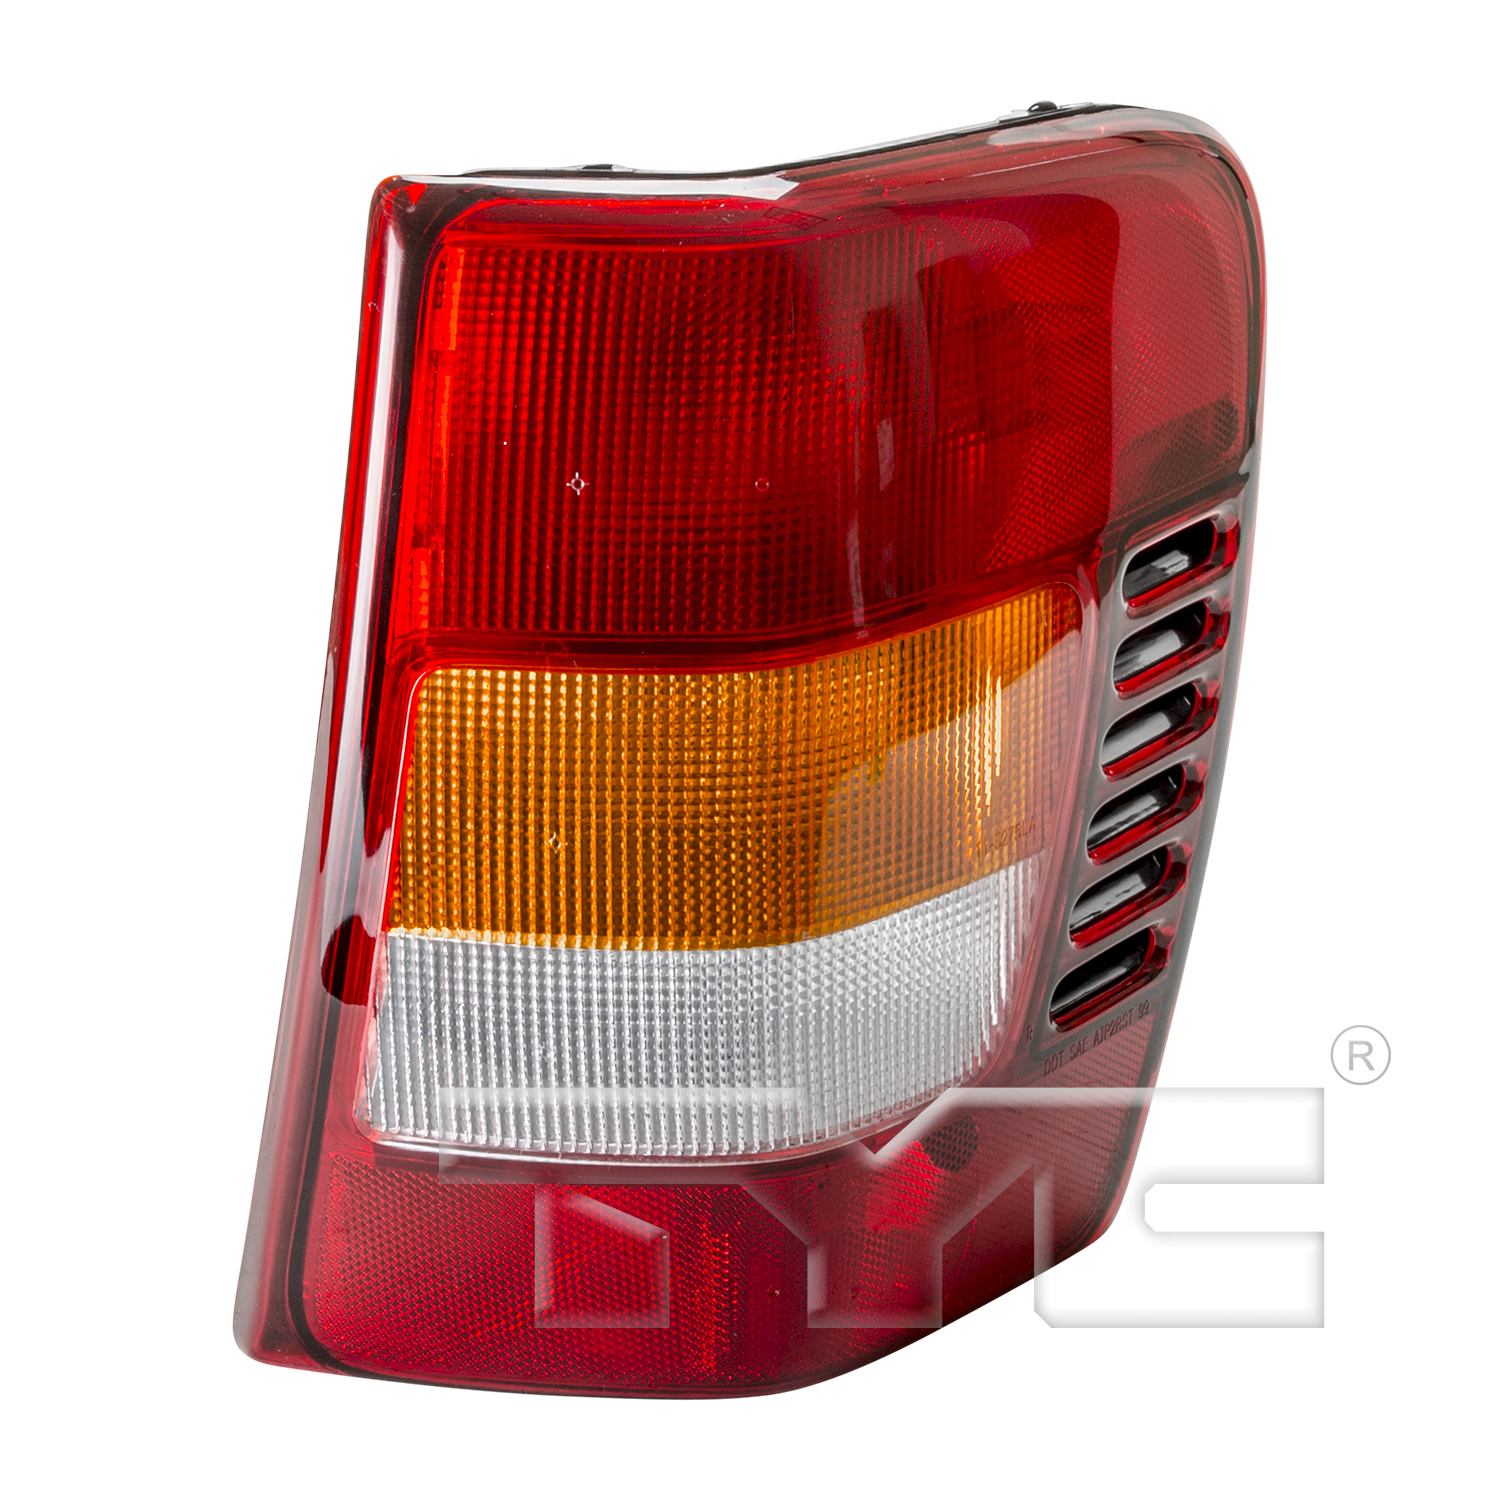 Aftermarket TAILLIGHTS for JEEP - GRAND CHEROKEE, GRAND CHEROKEE,02-04,RT Taillamp assy